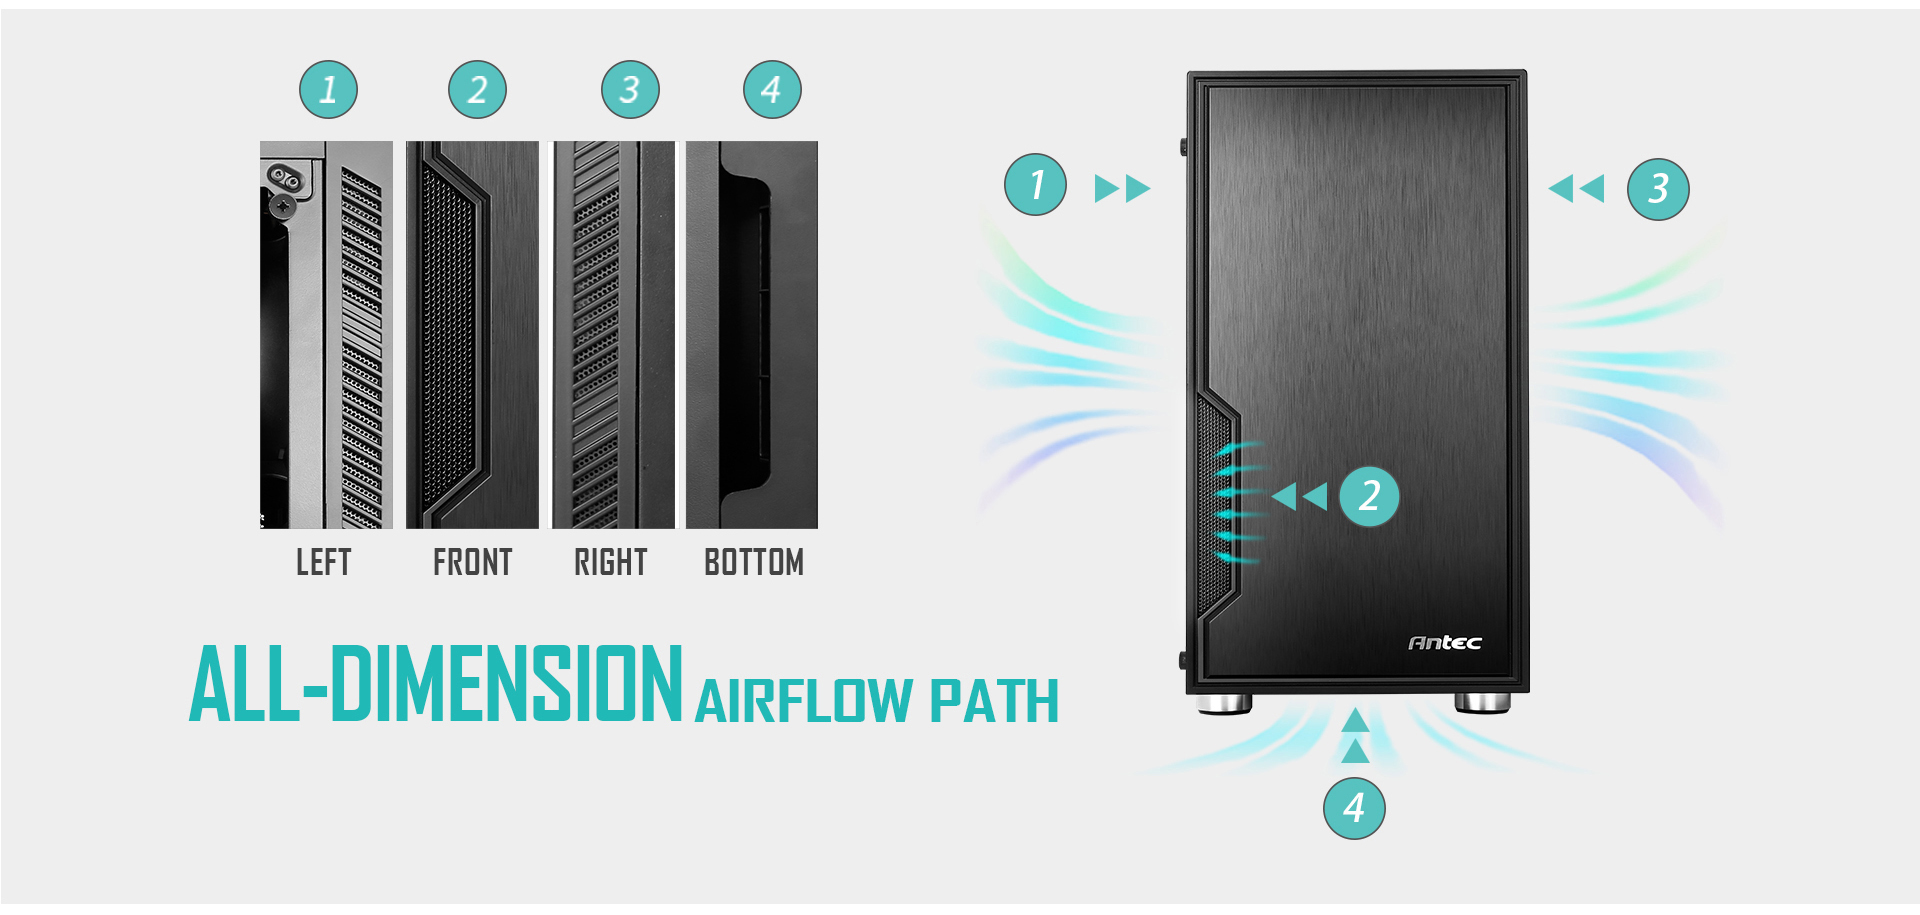 Antec Banner with hotspots showing the left, front, right and bottom air intakes along with an image of the case facing forward with graphics showing how airflow goes through these intakes. Below the images is text that reads: ALL-DIMENSION AIRFLOW PATH